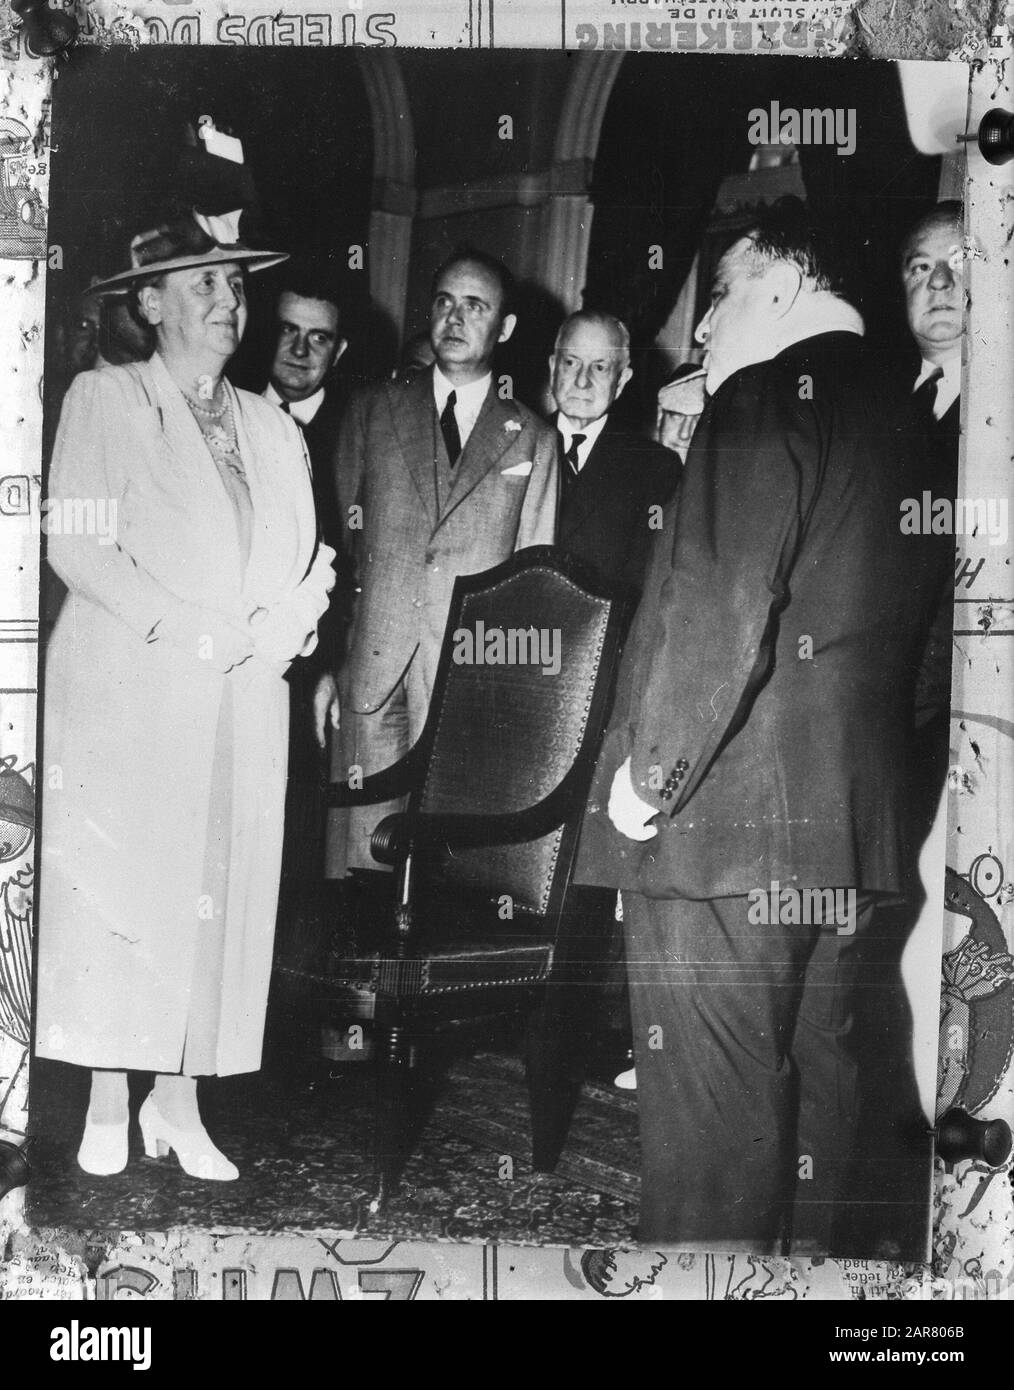 Queen Wilhelmina visits New York and is welcomed by Mayor La Guardia Annotation: Repronegative Date: 14 July 1941 Location: New York (city) Keywords: visits, mayors, queens, World War II Personal name: Guardia, Fiorello la, Wilhelmina (queen Netherlands) Stock Photo